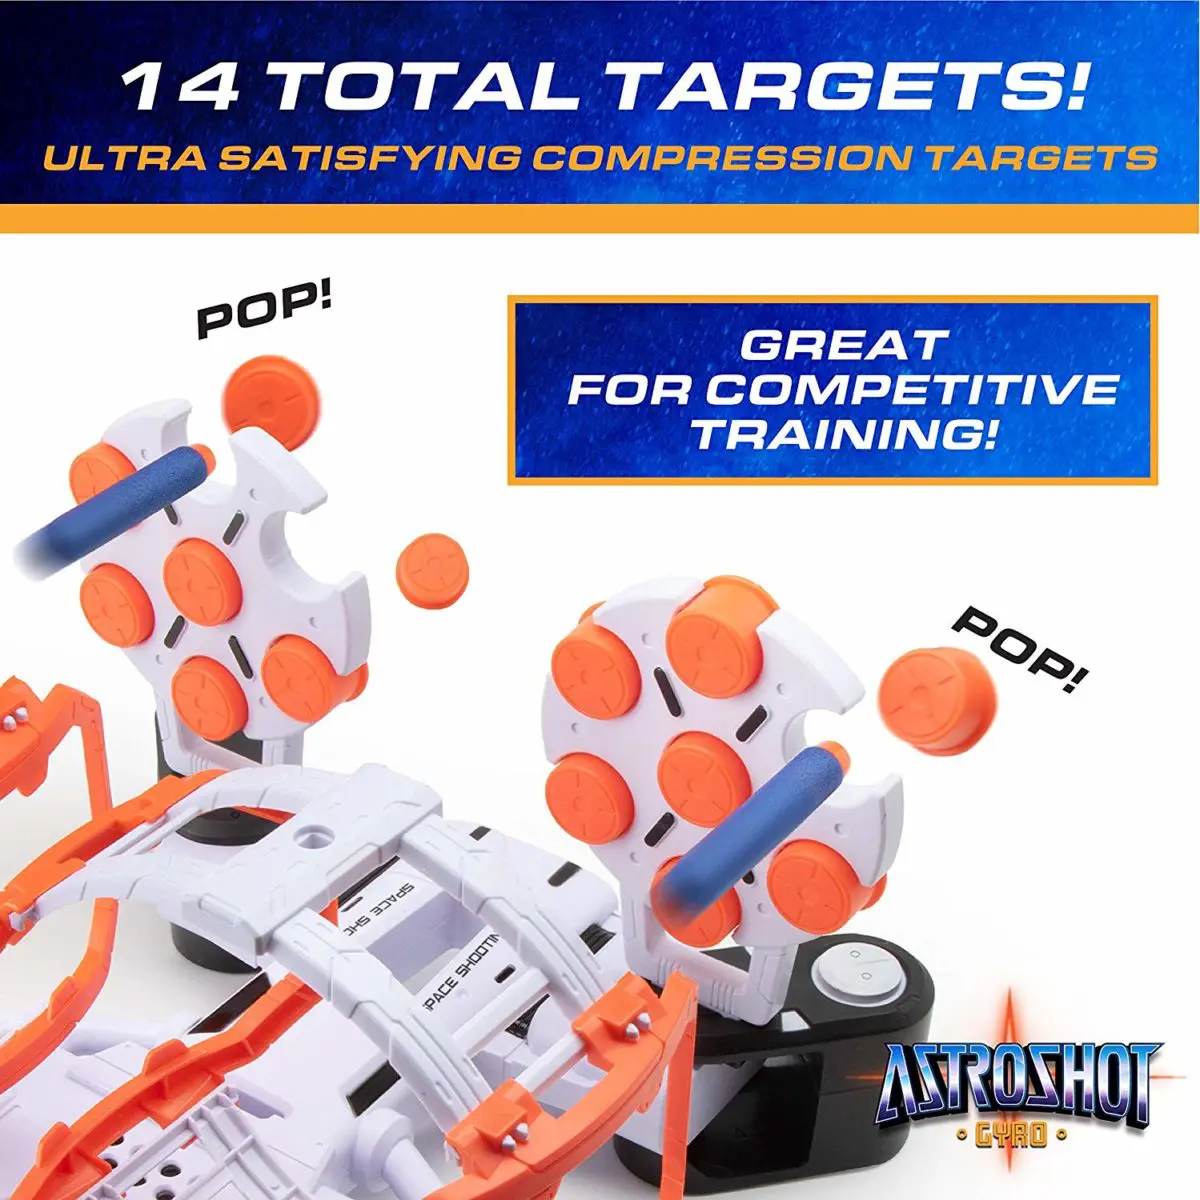 USA Toyz AstroShot Gyro Rotating Target Shooting Games - Top Toys and Gifts for Seven Year Old Boys 2